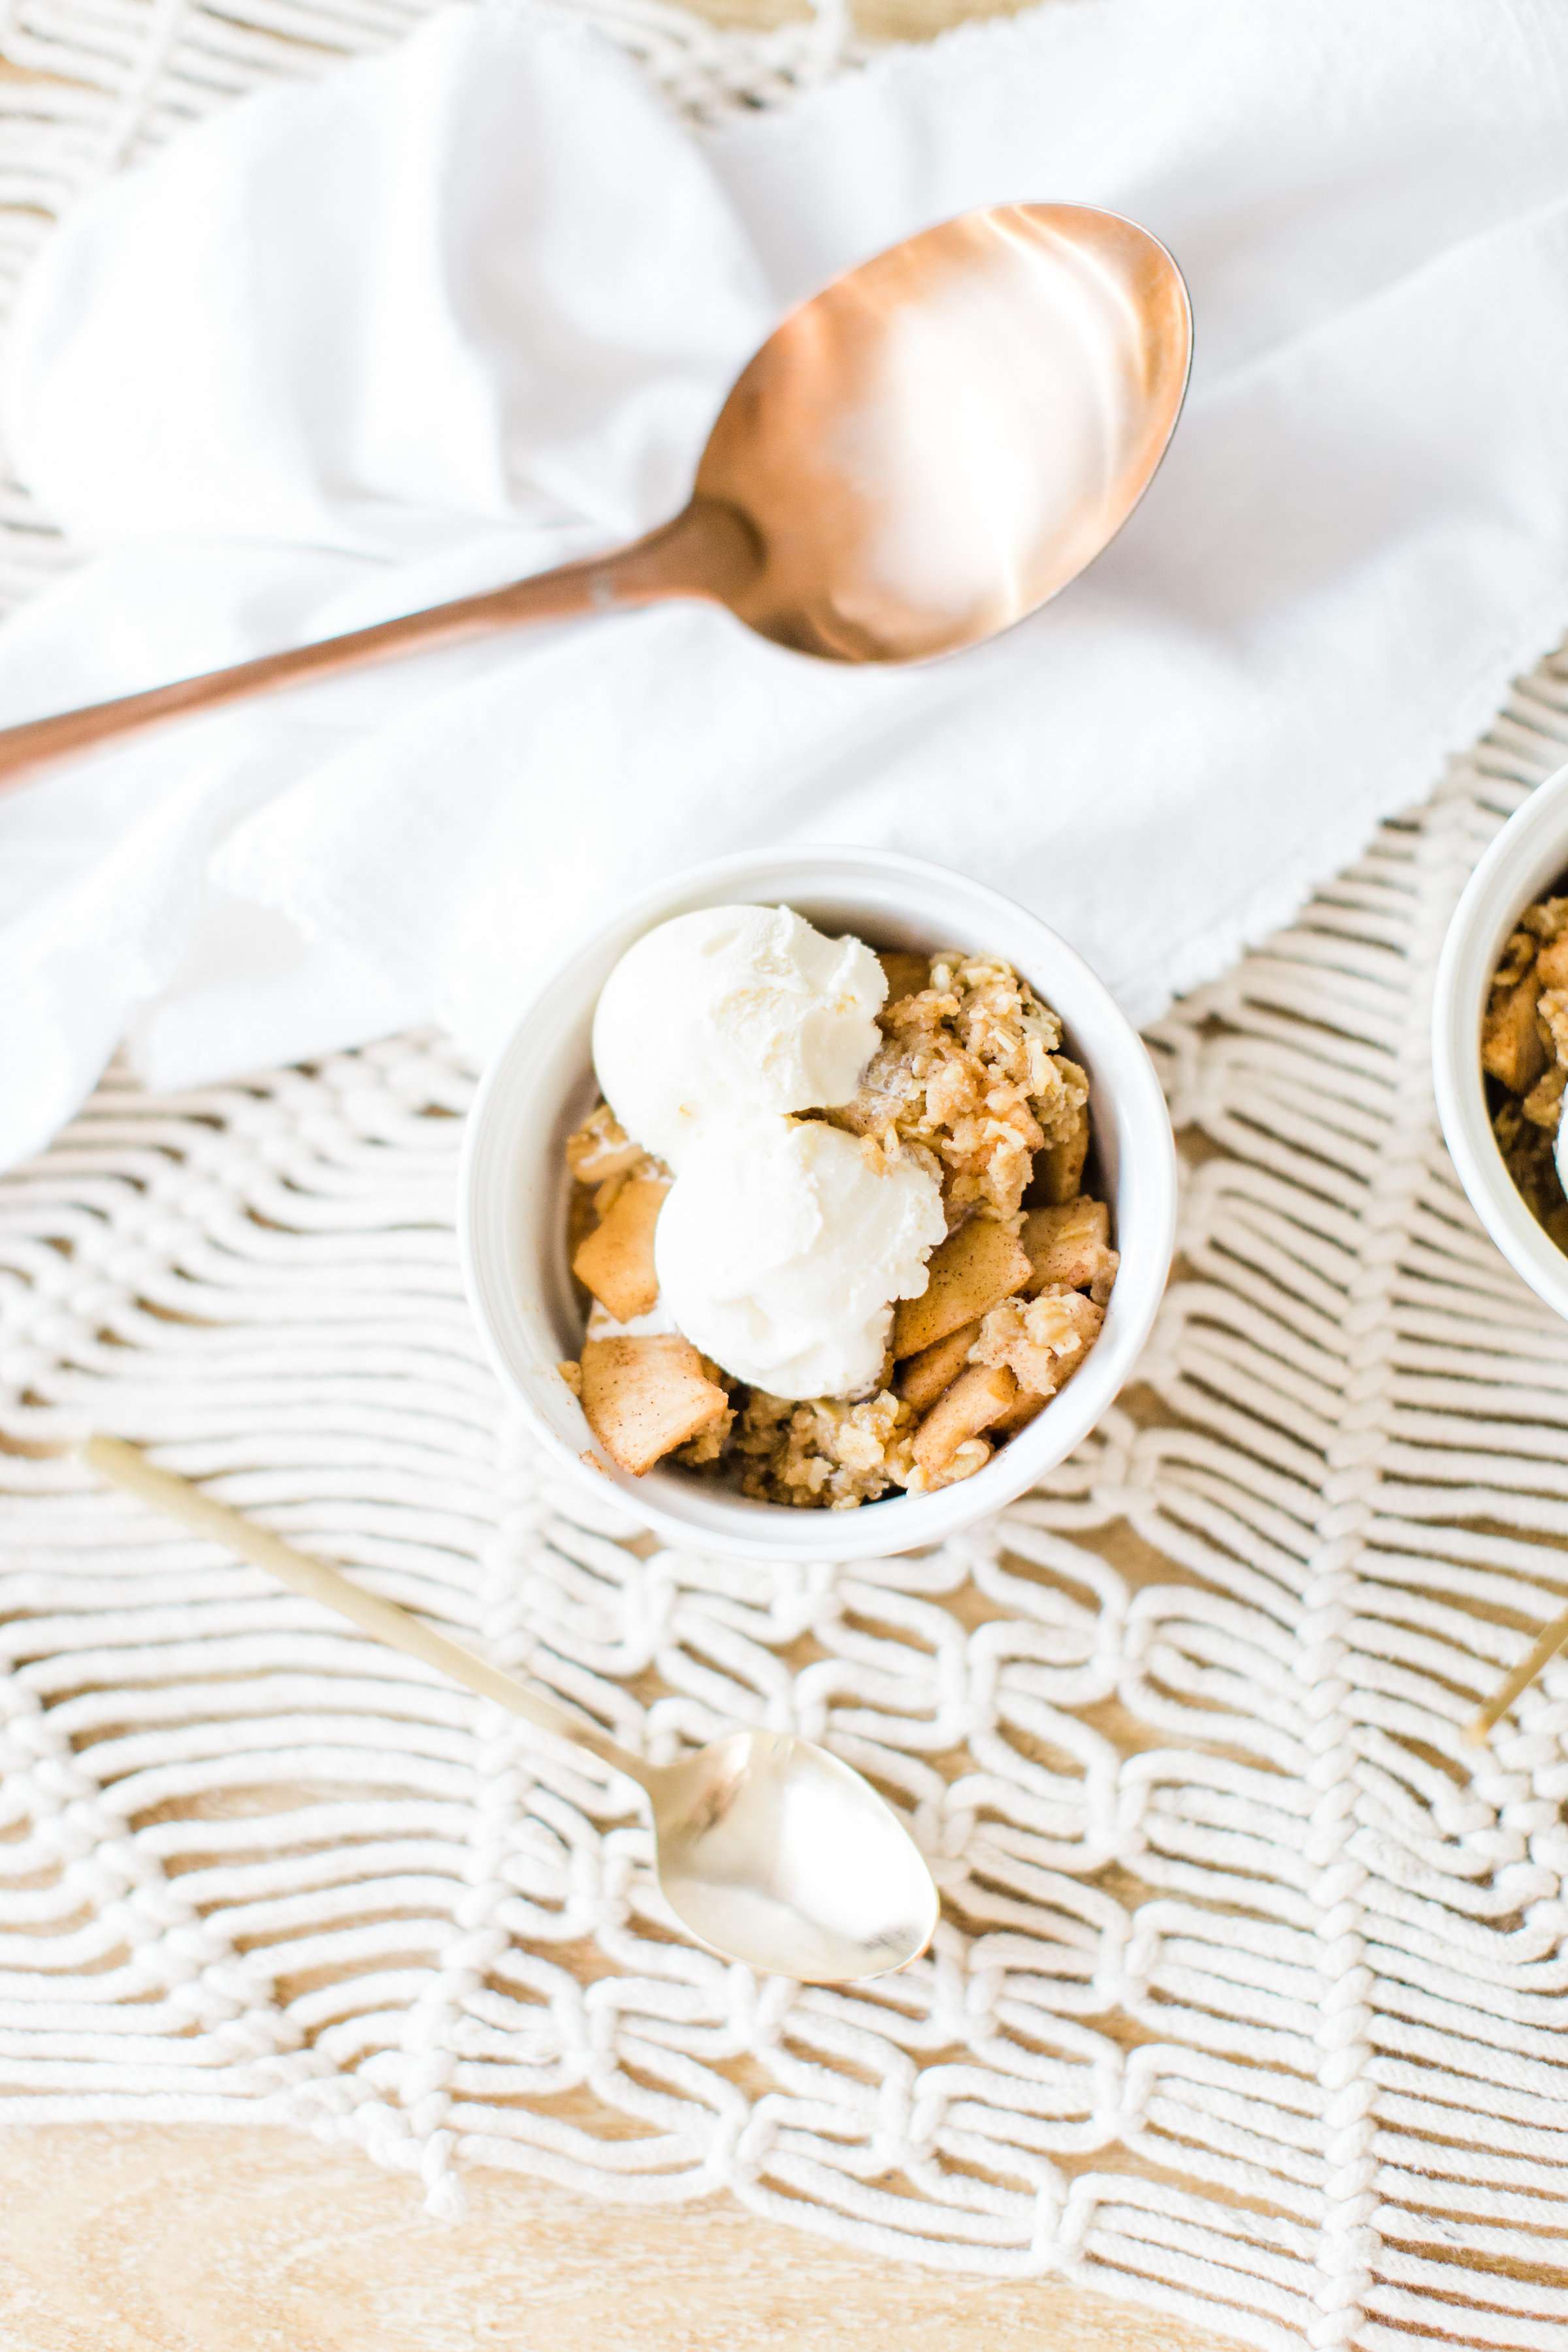 Foodie blogger Lexi of Glitter, Inc. shares how to make no-fuss slow cooker apple crisp, full of juicy apples, warm brown sugar, and a buttery crumbly topping. Click through for the recipe. | glitterinc.com | @glitterinc